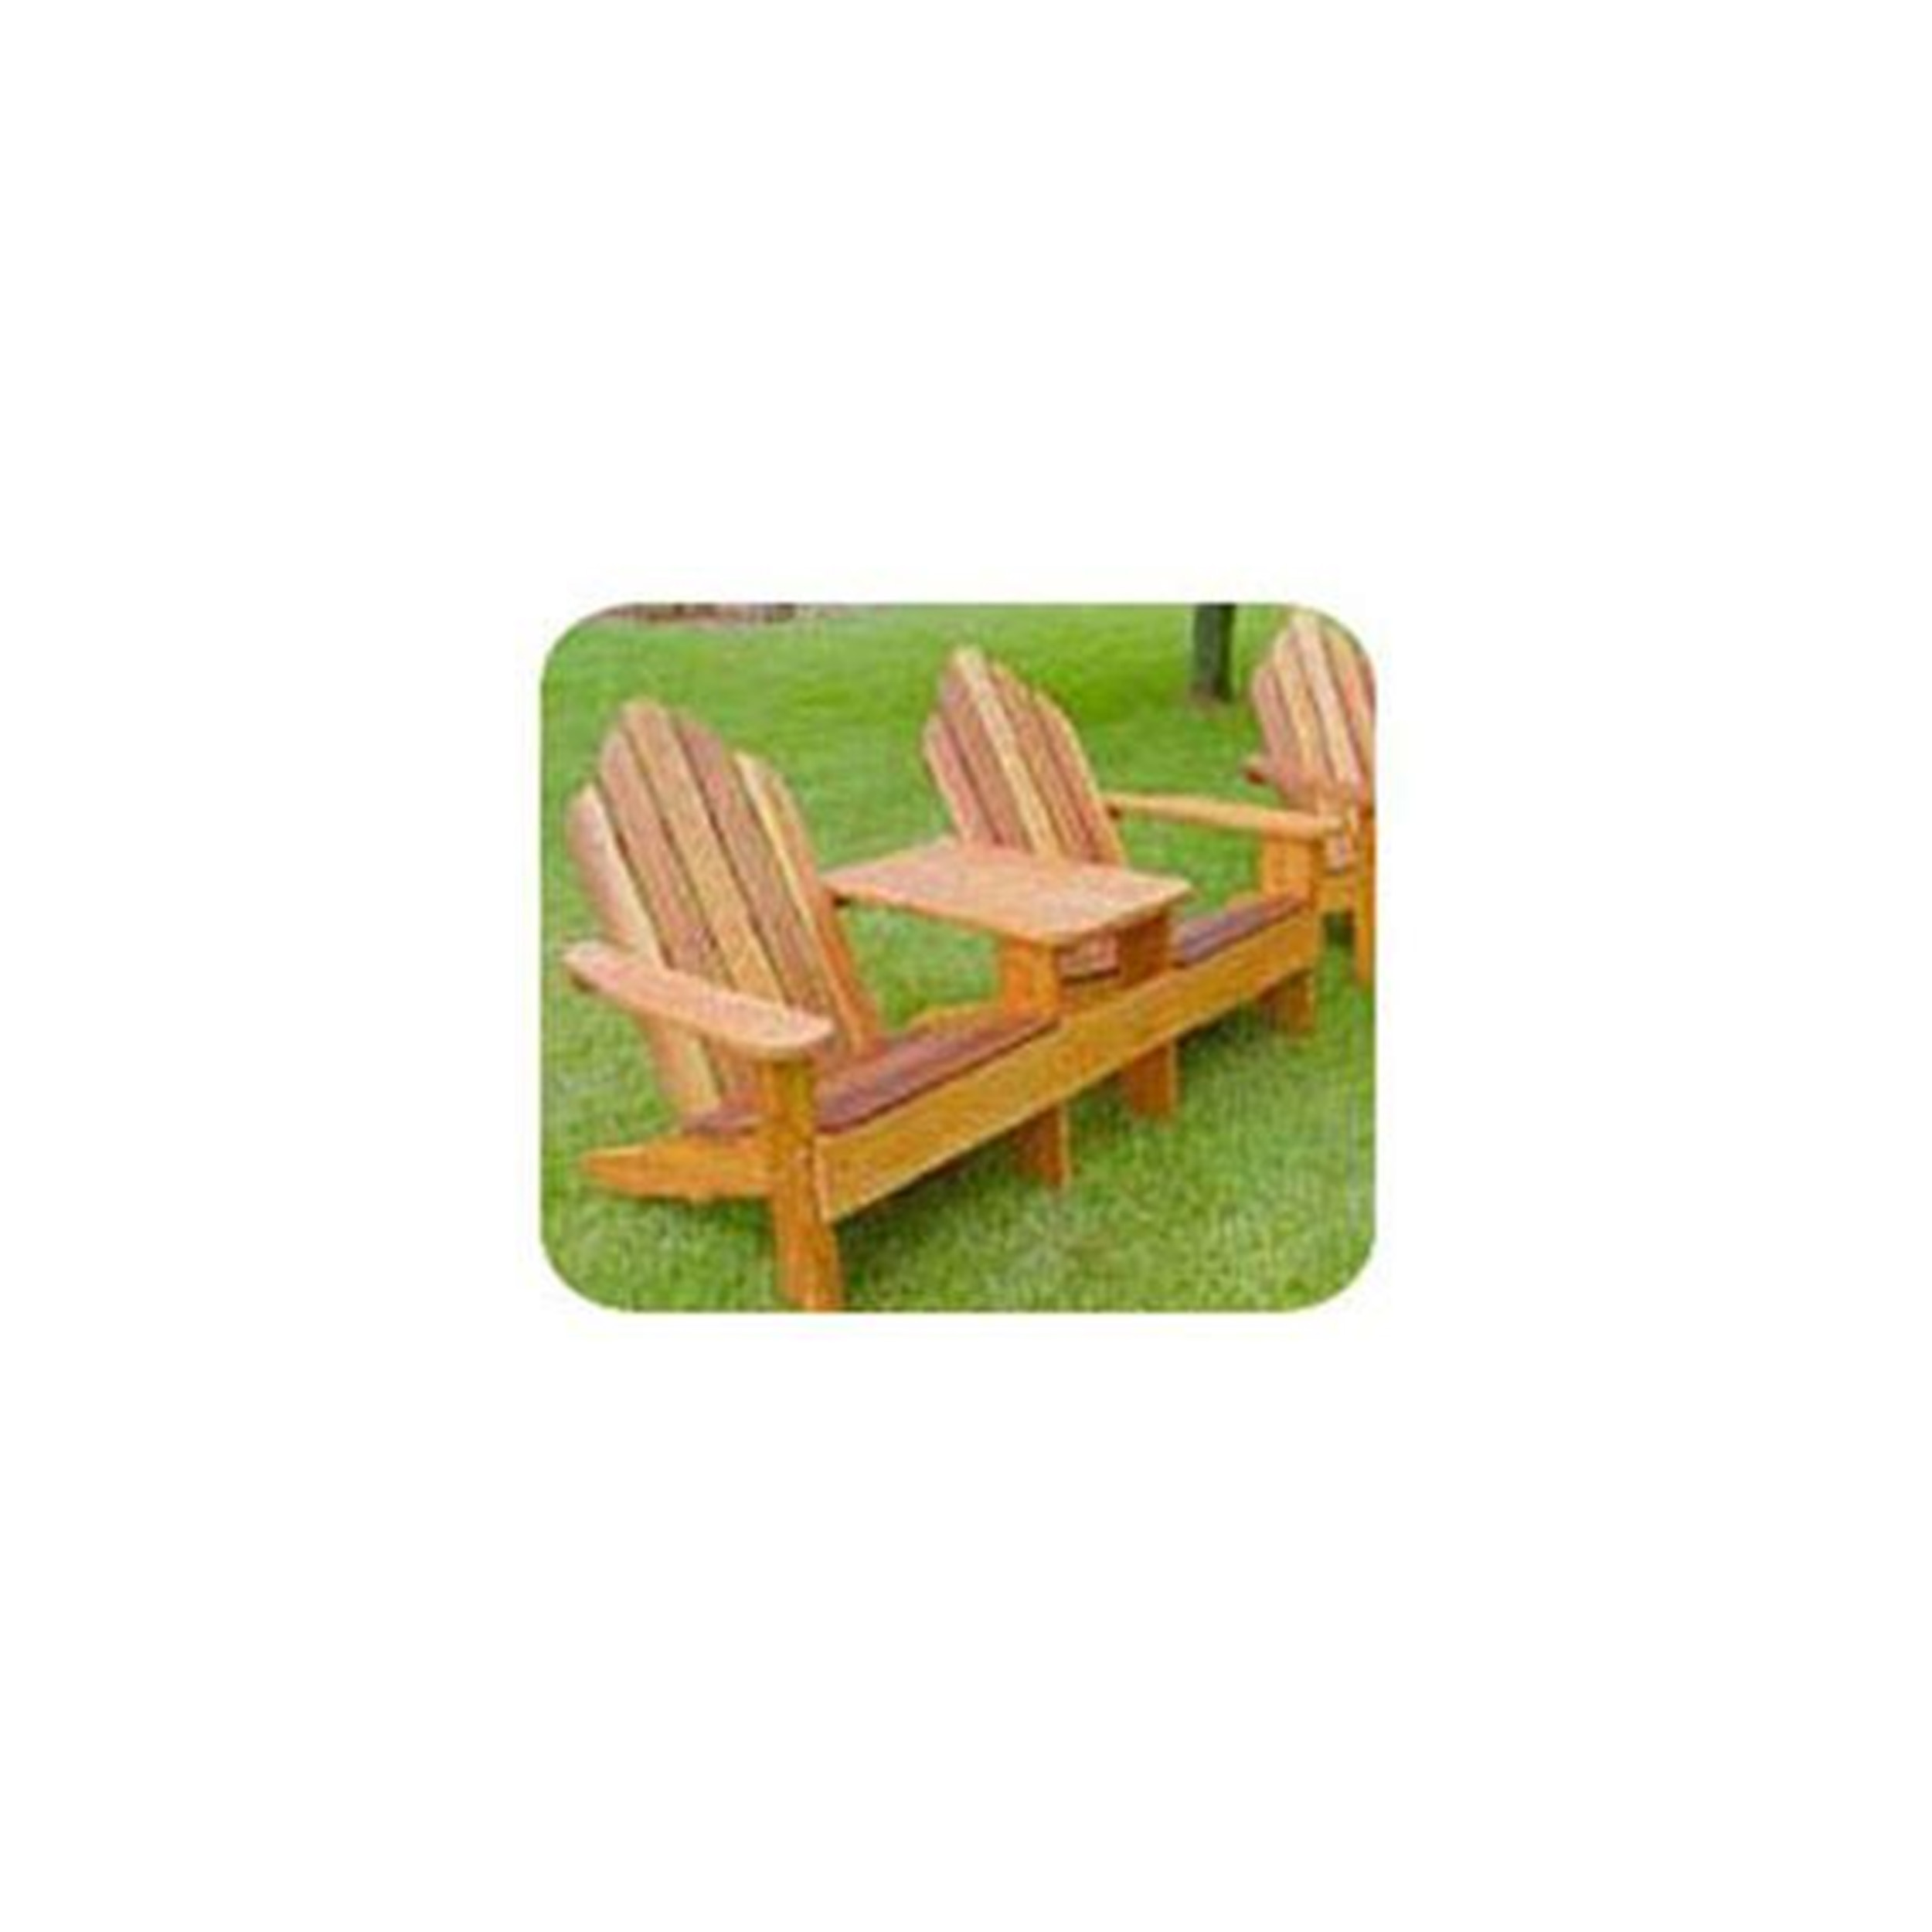 Woodworking Project Paper Plan To Build Classic Adirondack Tete-a-tete